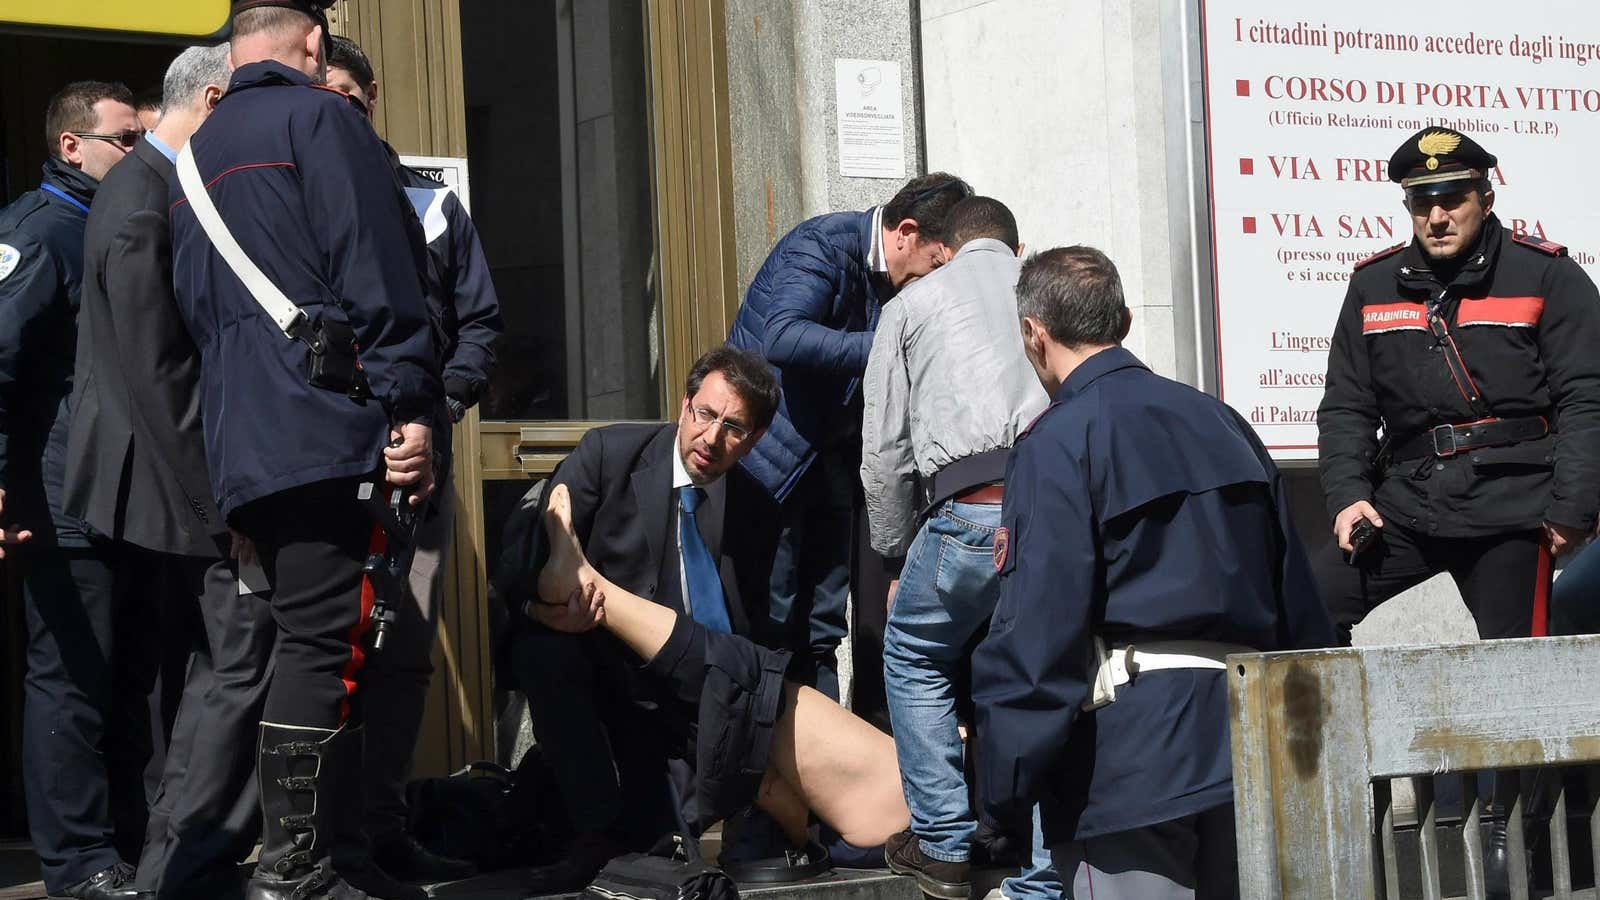 Rescuers and police help an injured person outside the tribunal building in Milan.